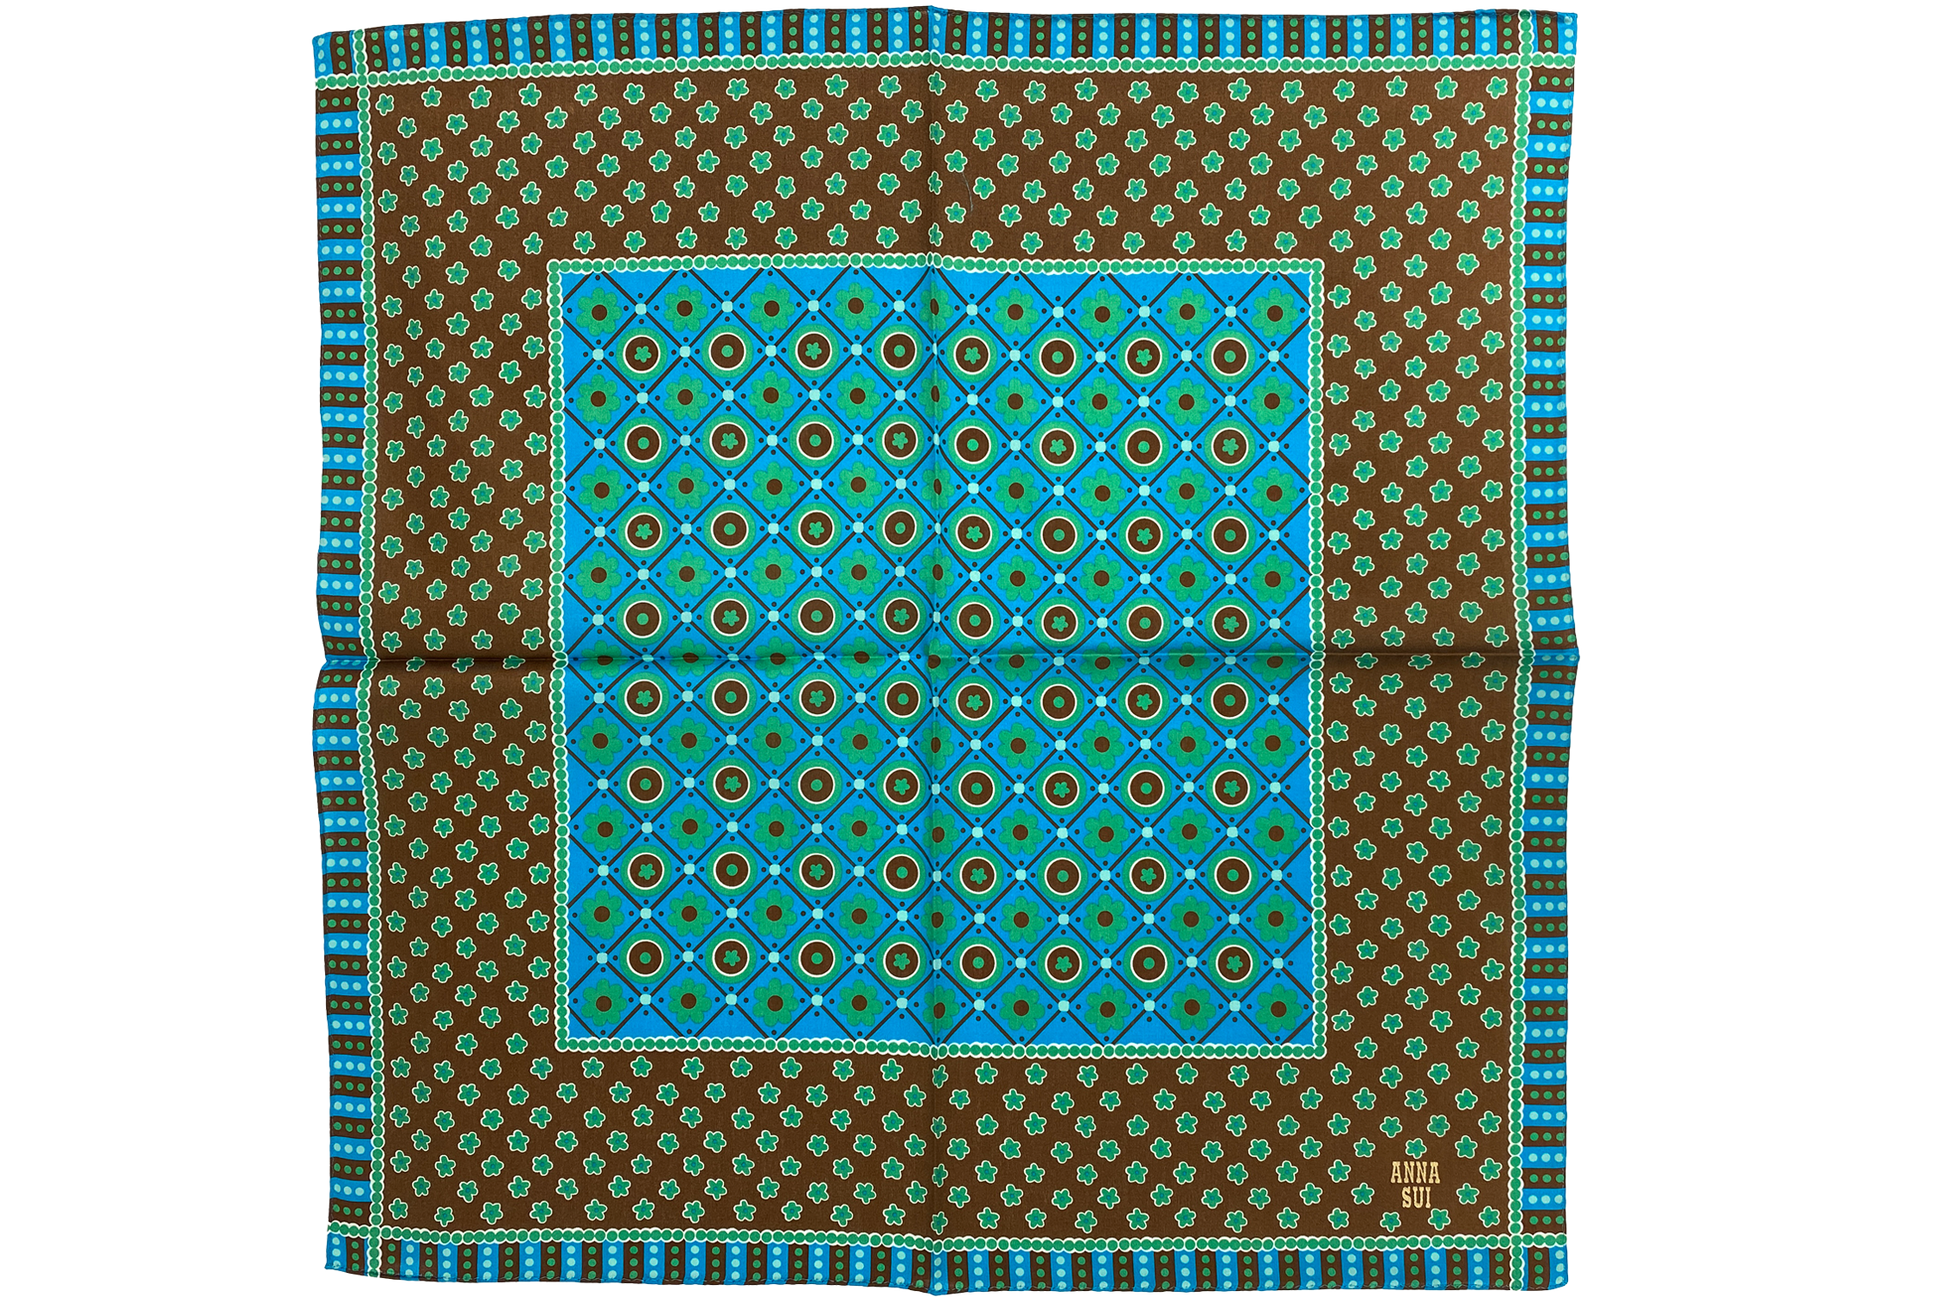 Handkerchief, center blue square green flower then brown with green flowers, Anna’s label